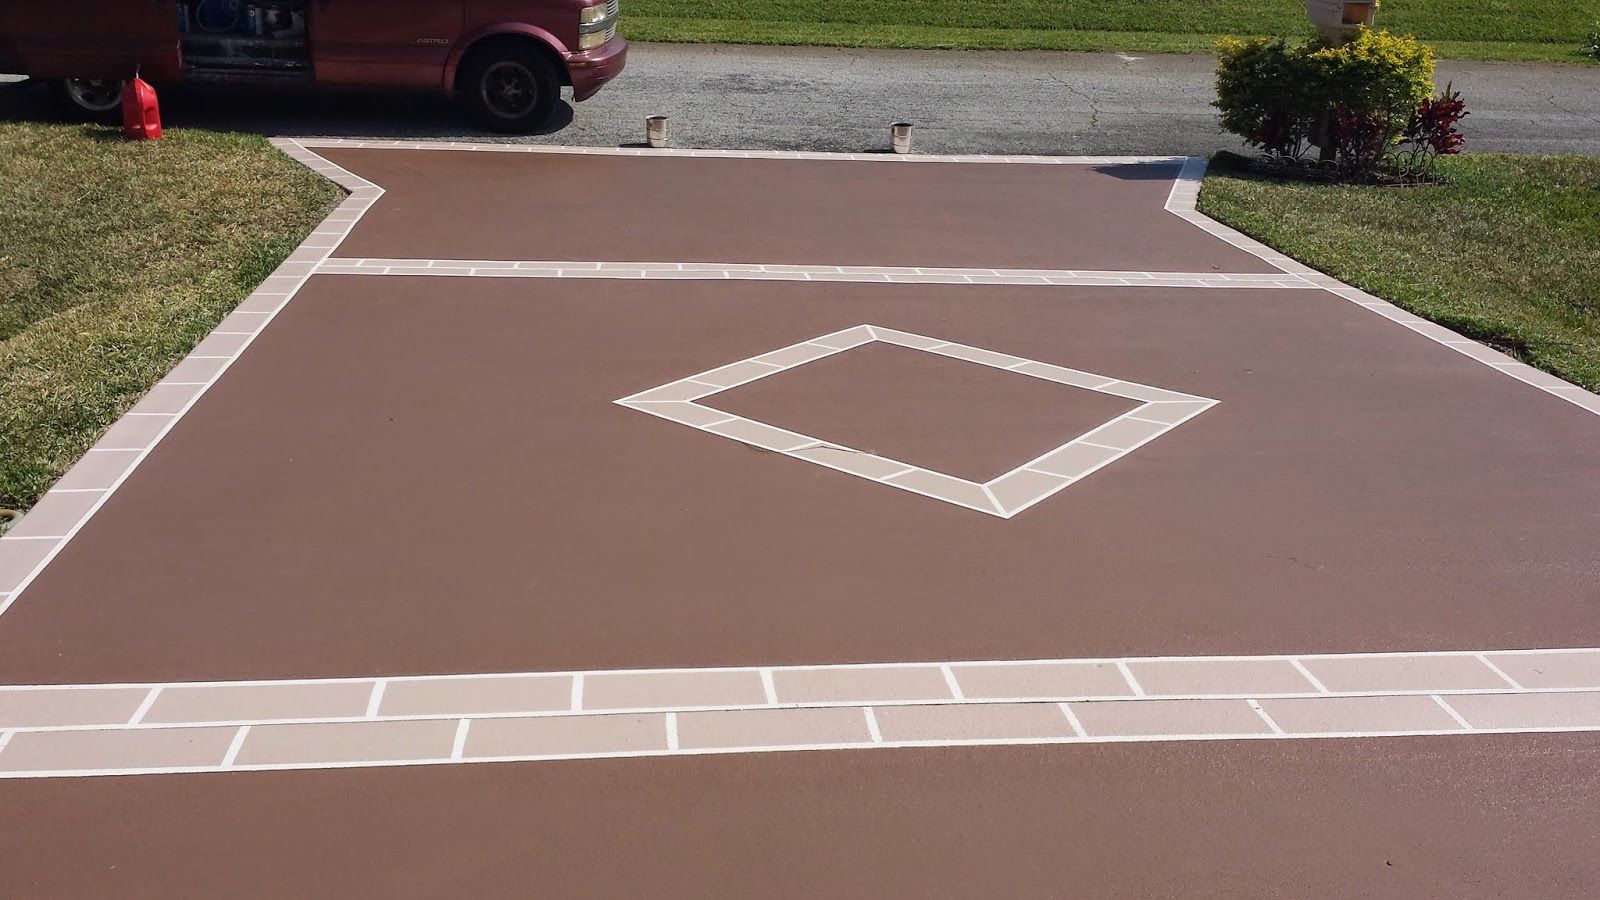 Driveway Painting at PaintingValley.com | Explore ...